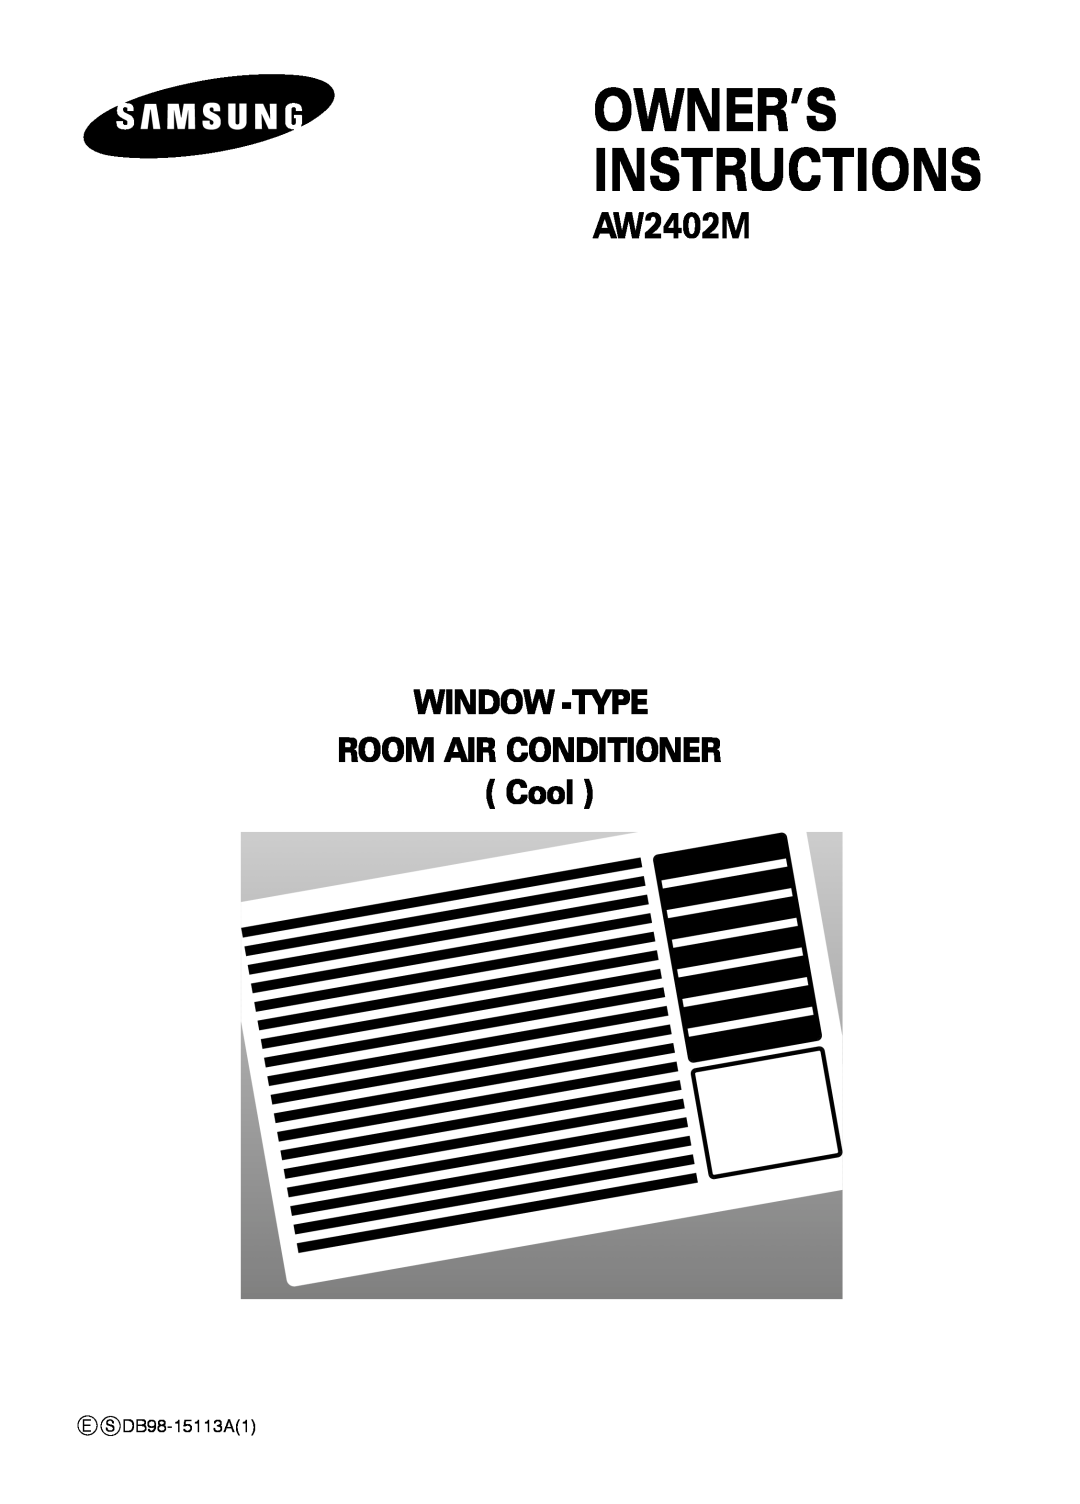 Samsung AW2402M manual Owner’S Instructions, WINDOW -TYPE ROOM AIR CONDITIONER Cool 